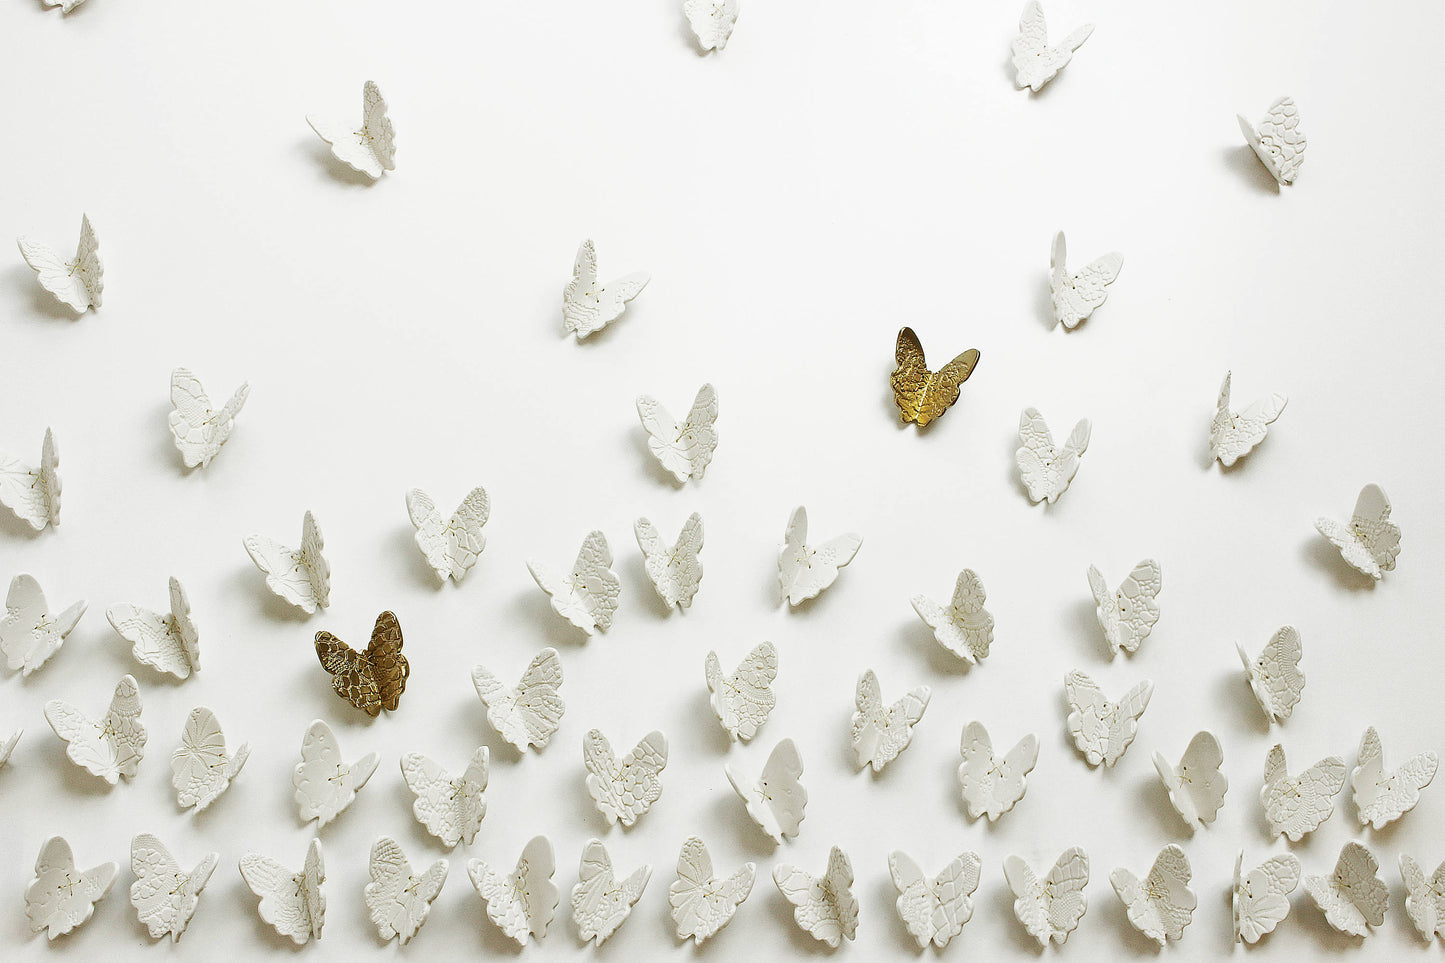 Flutter - Extra large wall art set of 60 3D Butterfly sculptures - Choose 60 white porcelain or 57 white and 3 gold finish handmade ceramic butterflies